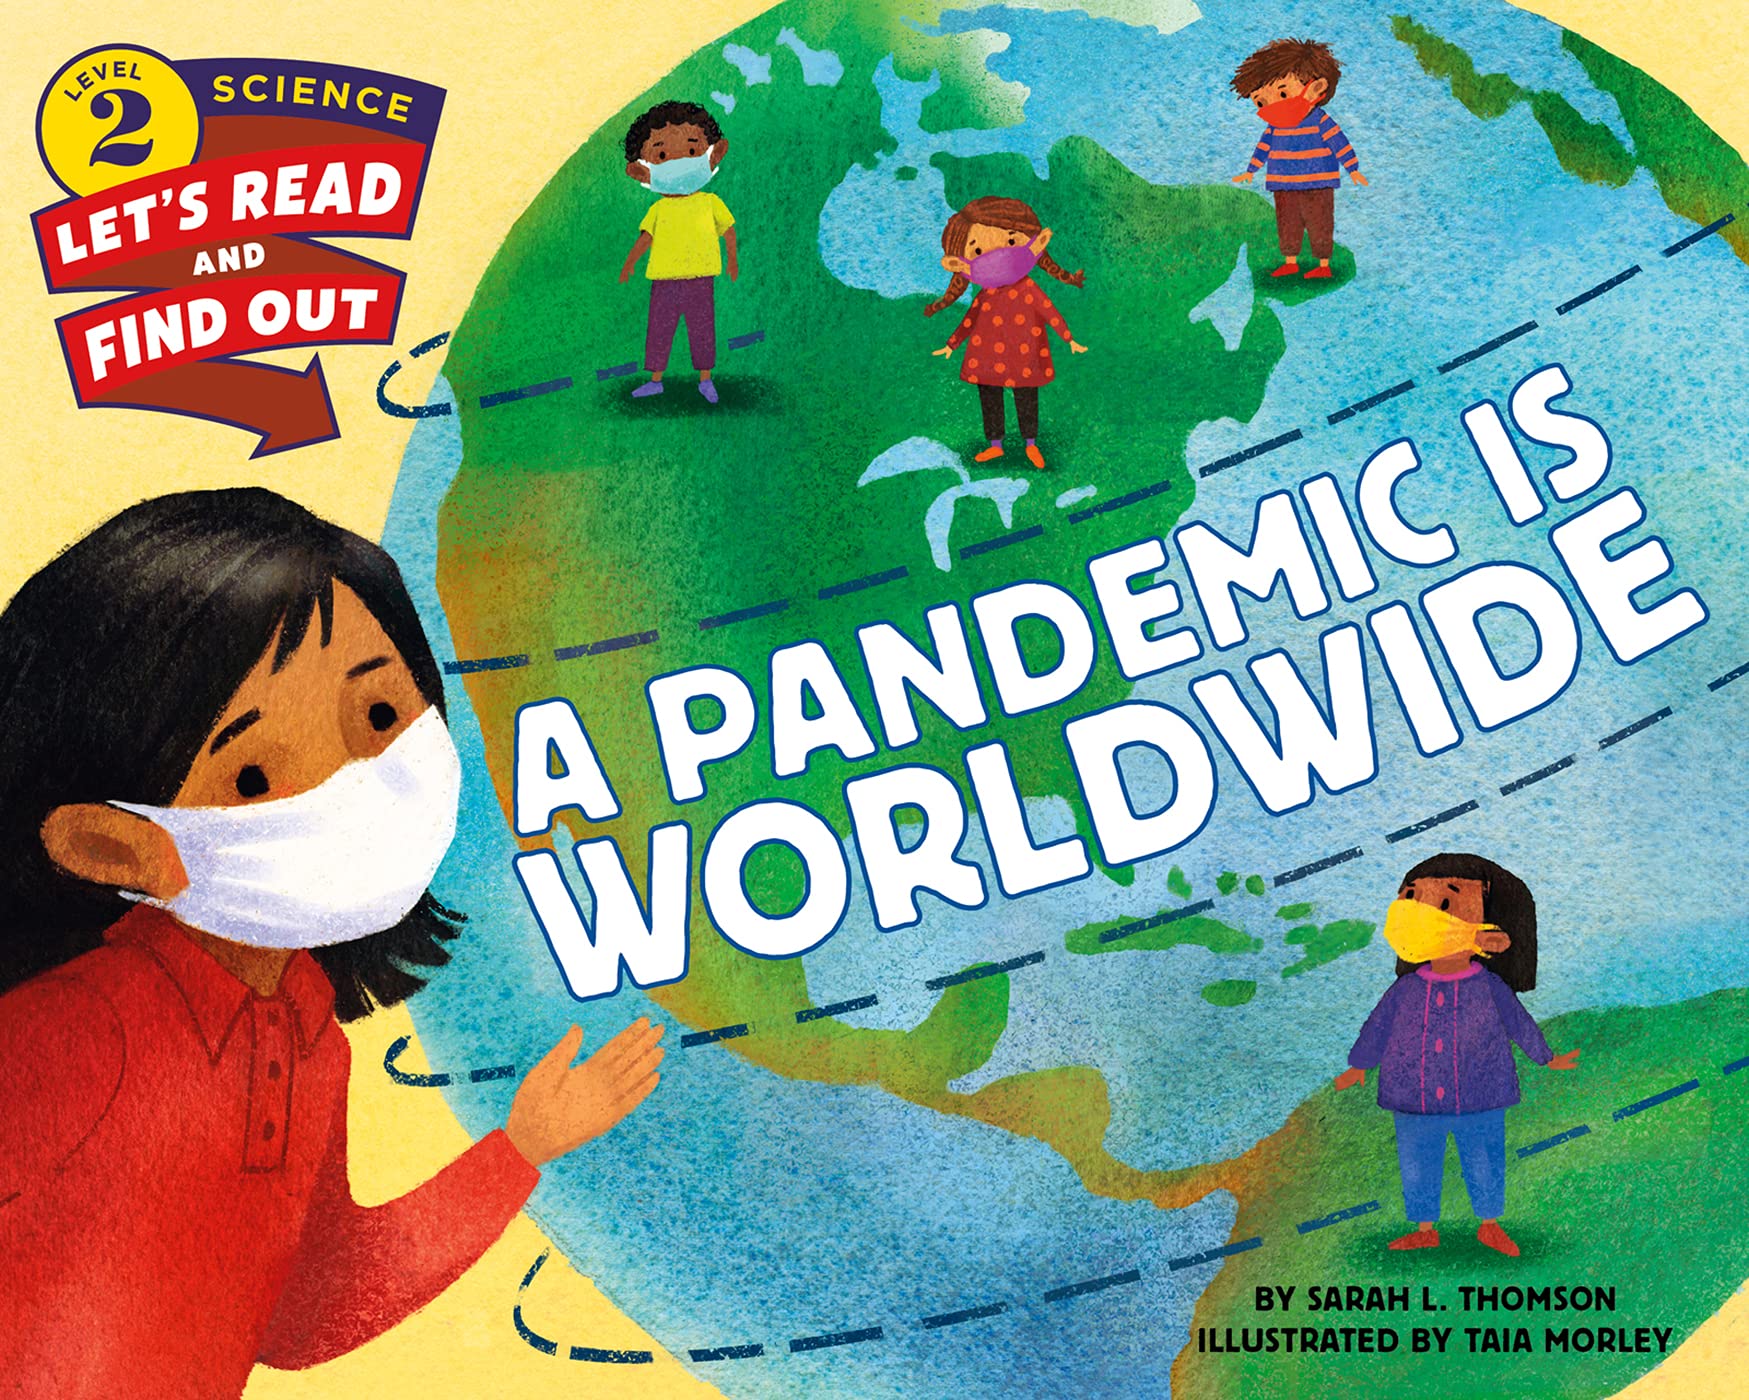 A Pandemic Is Worldwide (Paperback)